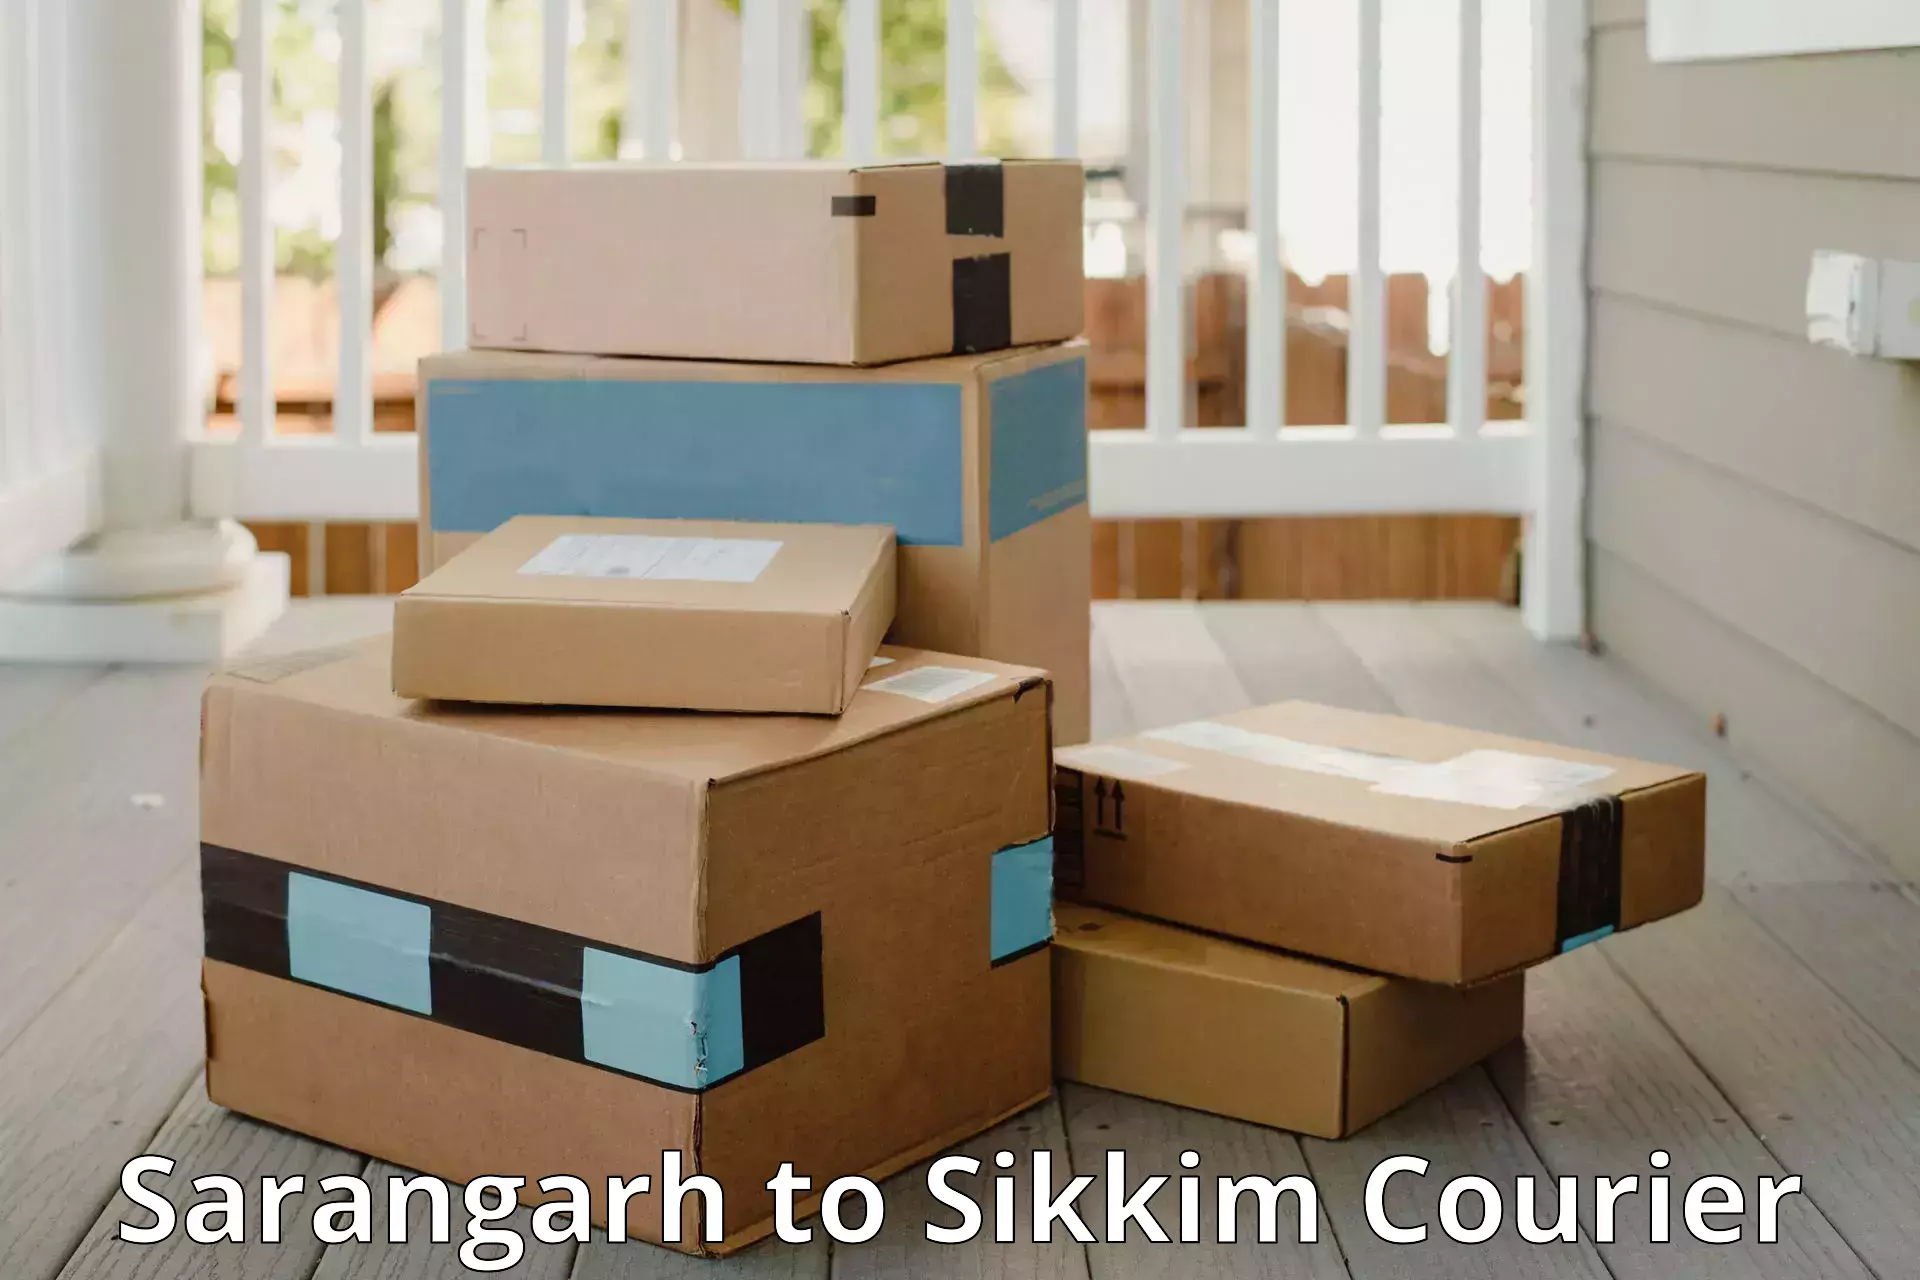 Instant baggage transport quote Sarangarh to West Sikkim